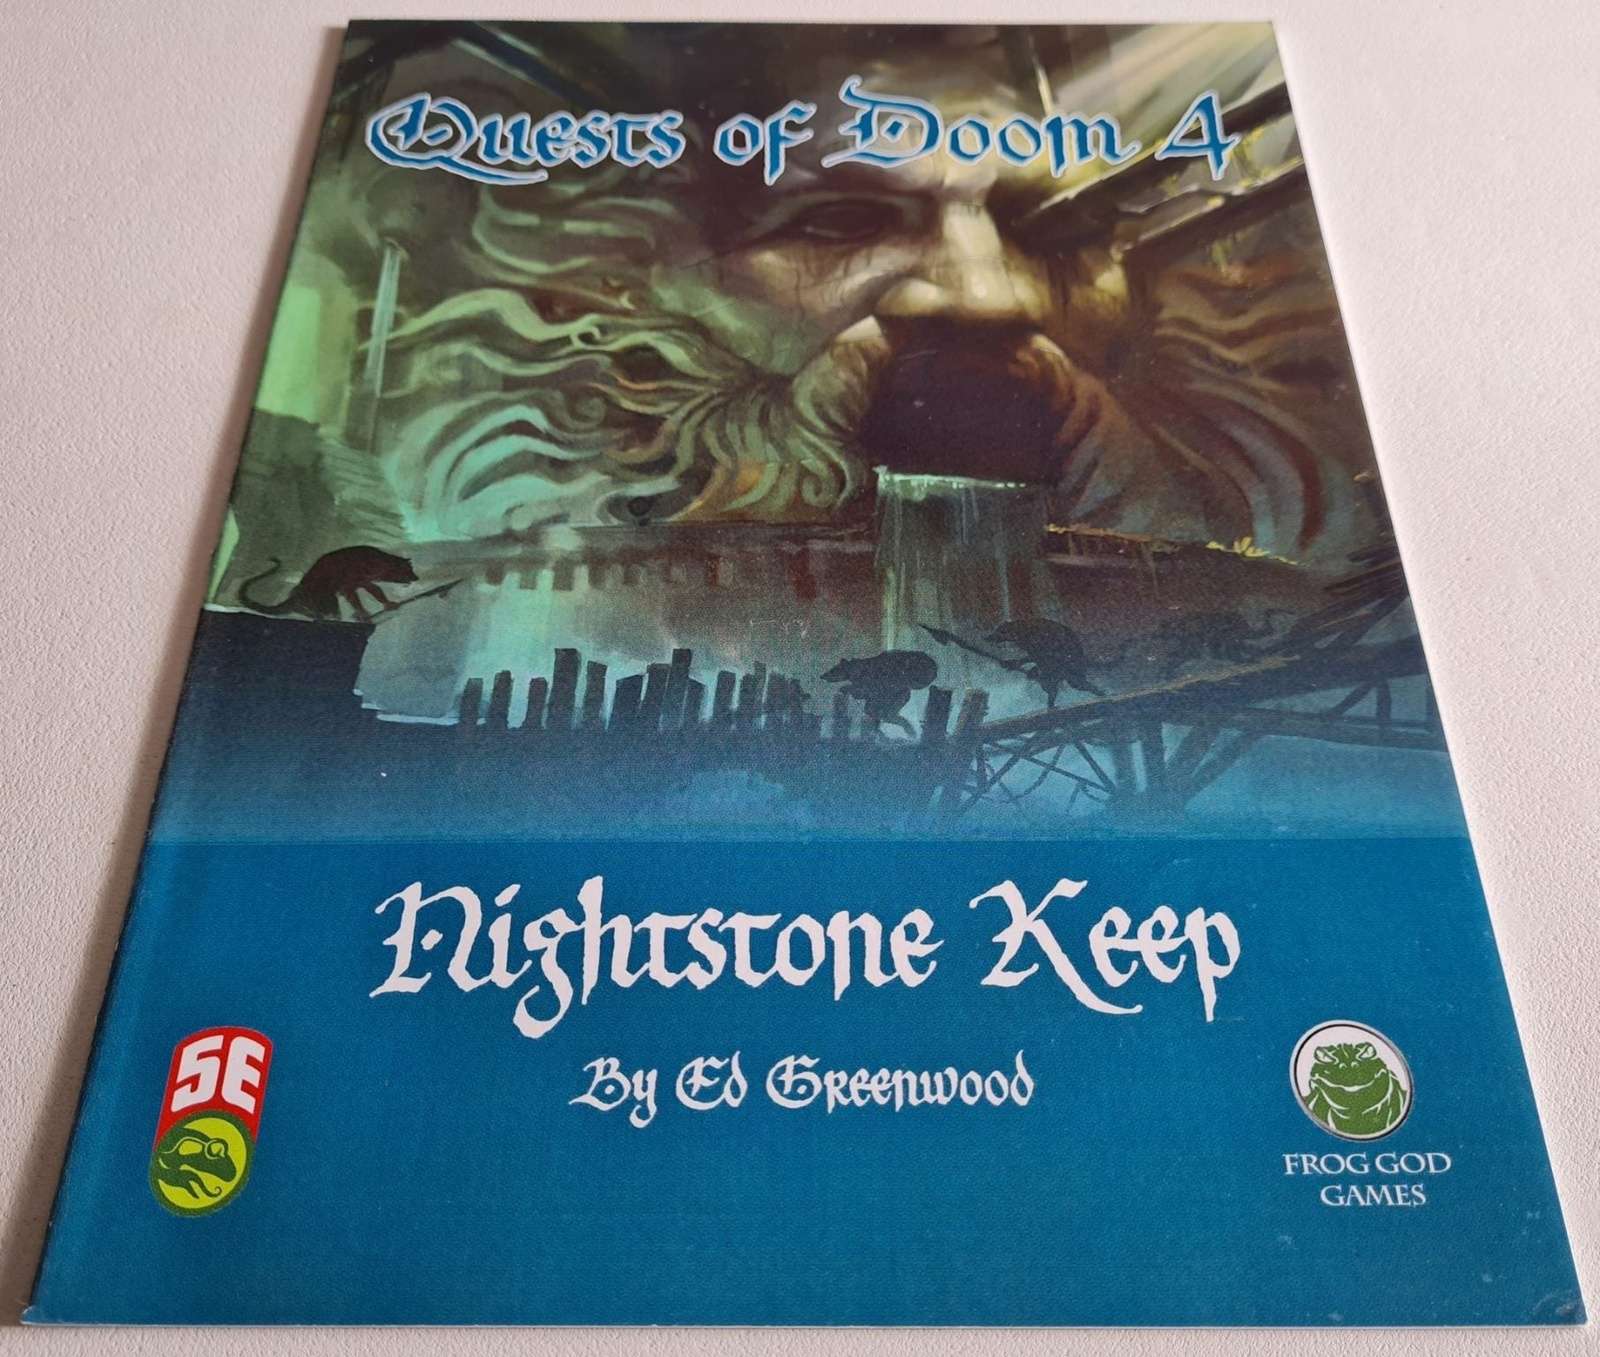 Quests of Doom 4: Nightstone Keep - Dungeons and Dragons - 5th Edition (5e)